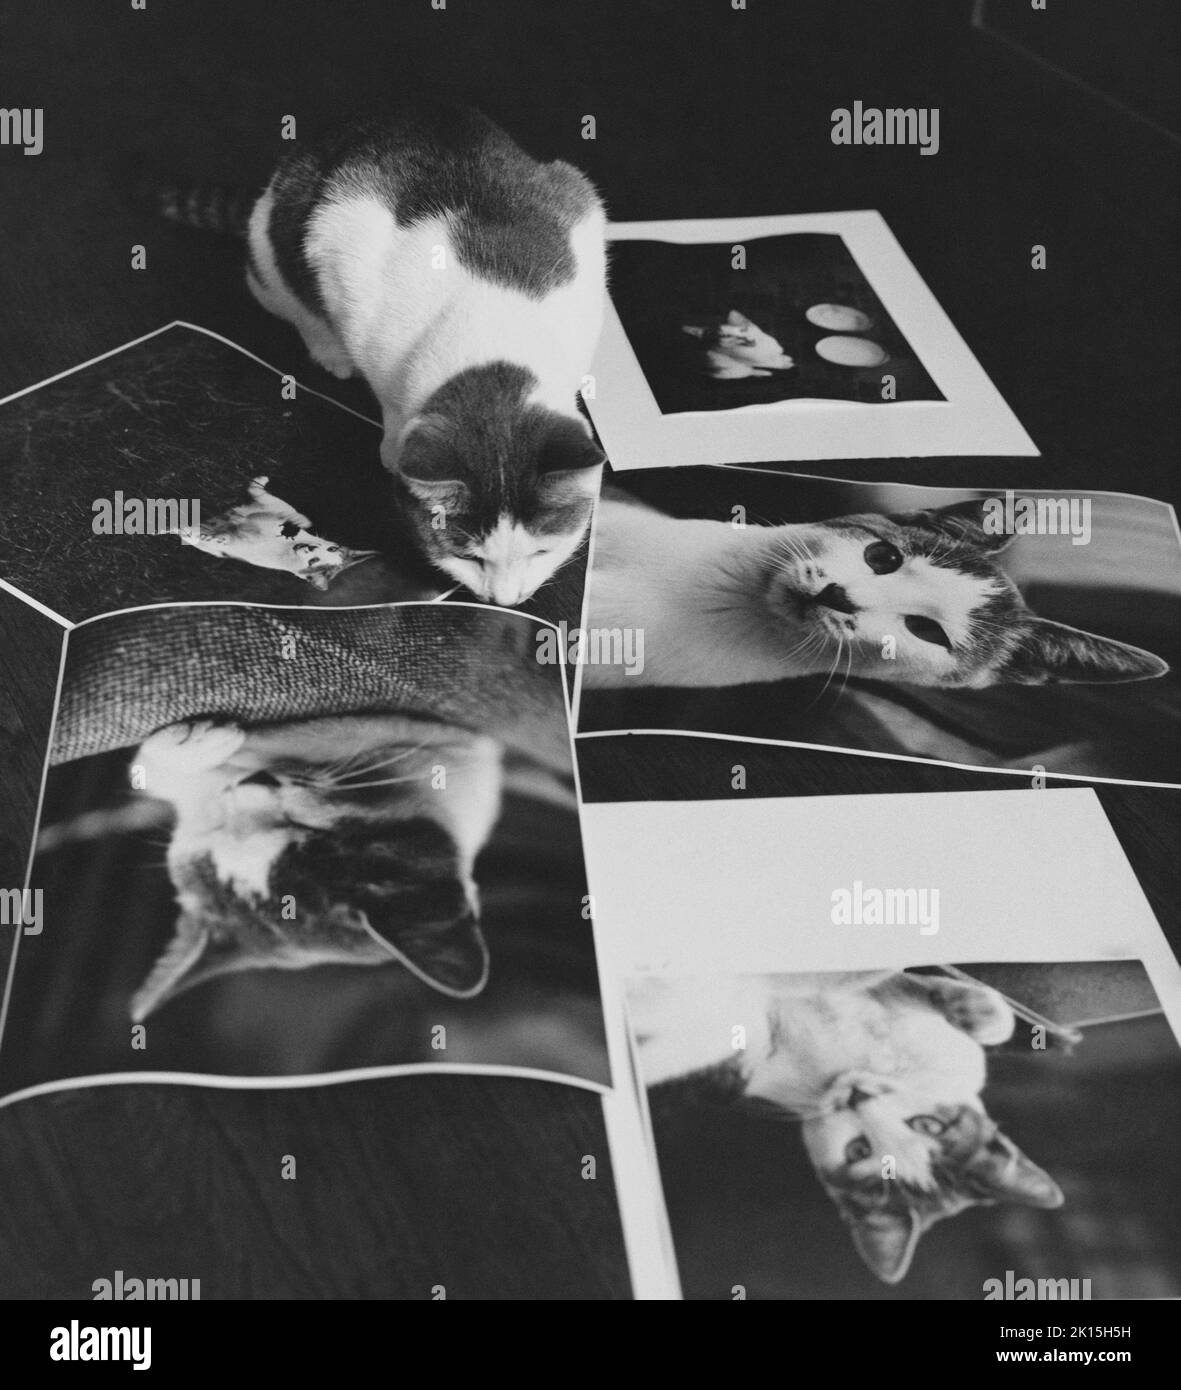 Cat (unknown breed) examines photographs of itself. Stock Photo